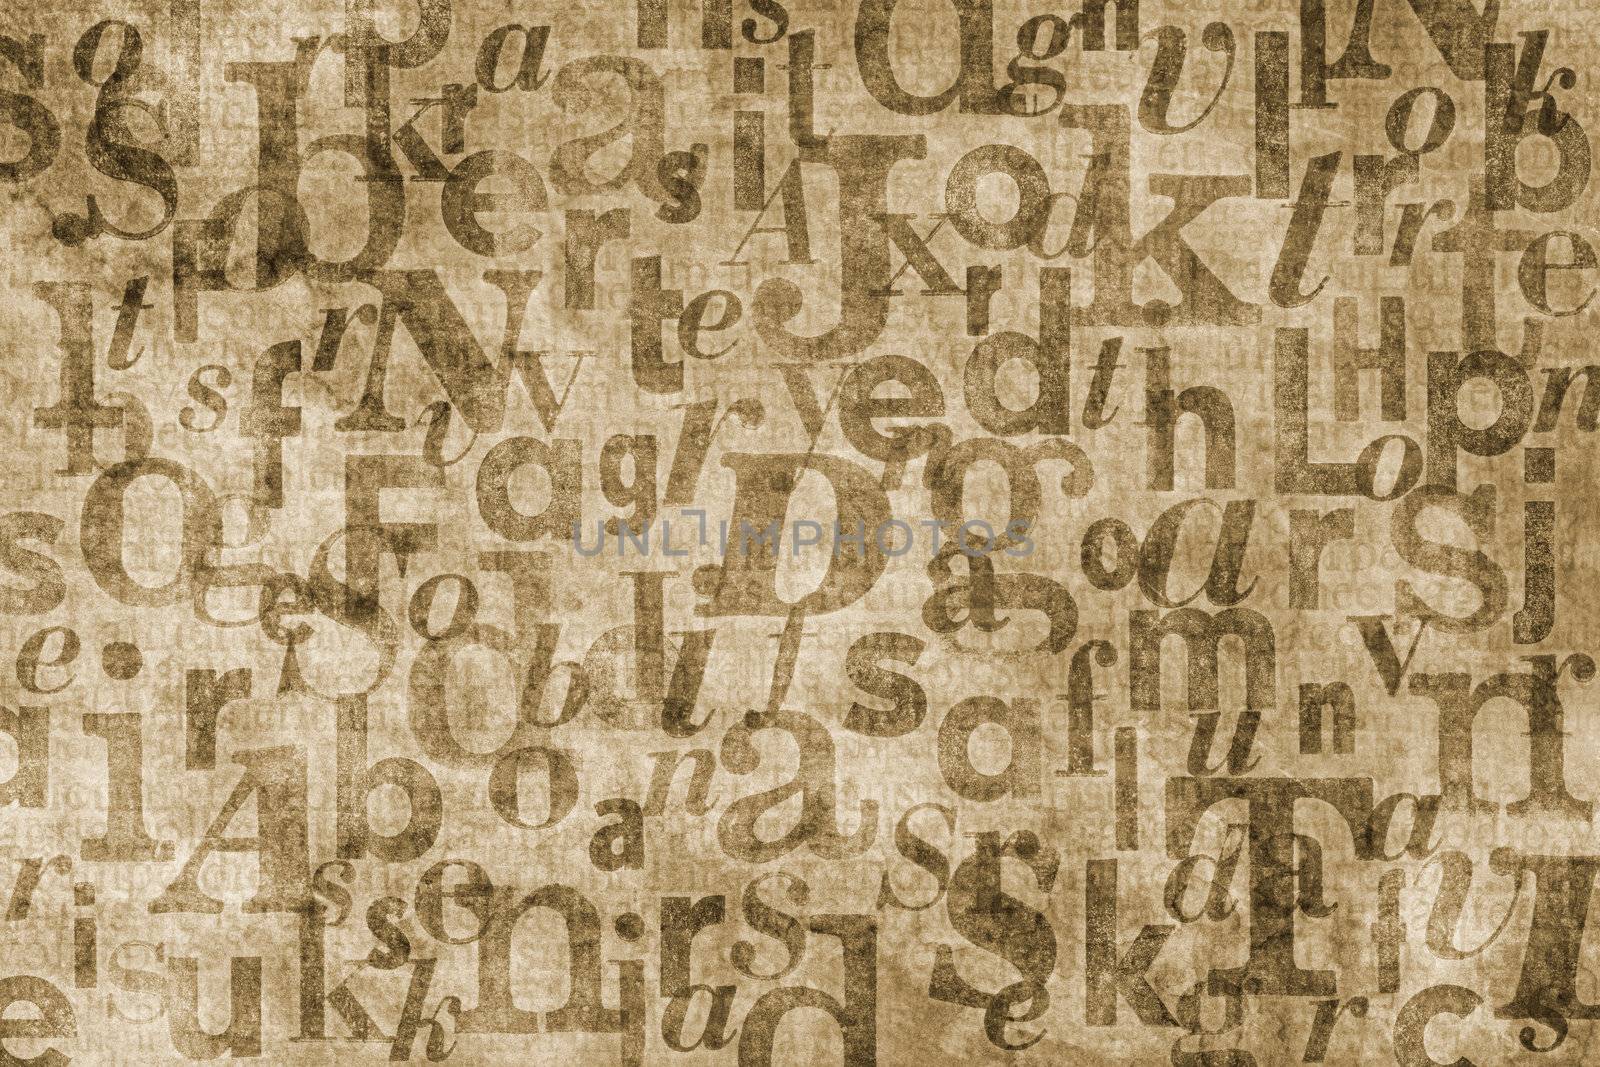 Grainy and gritty background image made of letters from old newspapers superimposed on eachother.